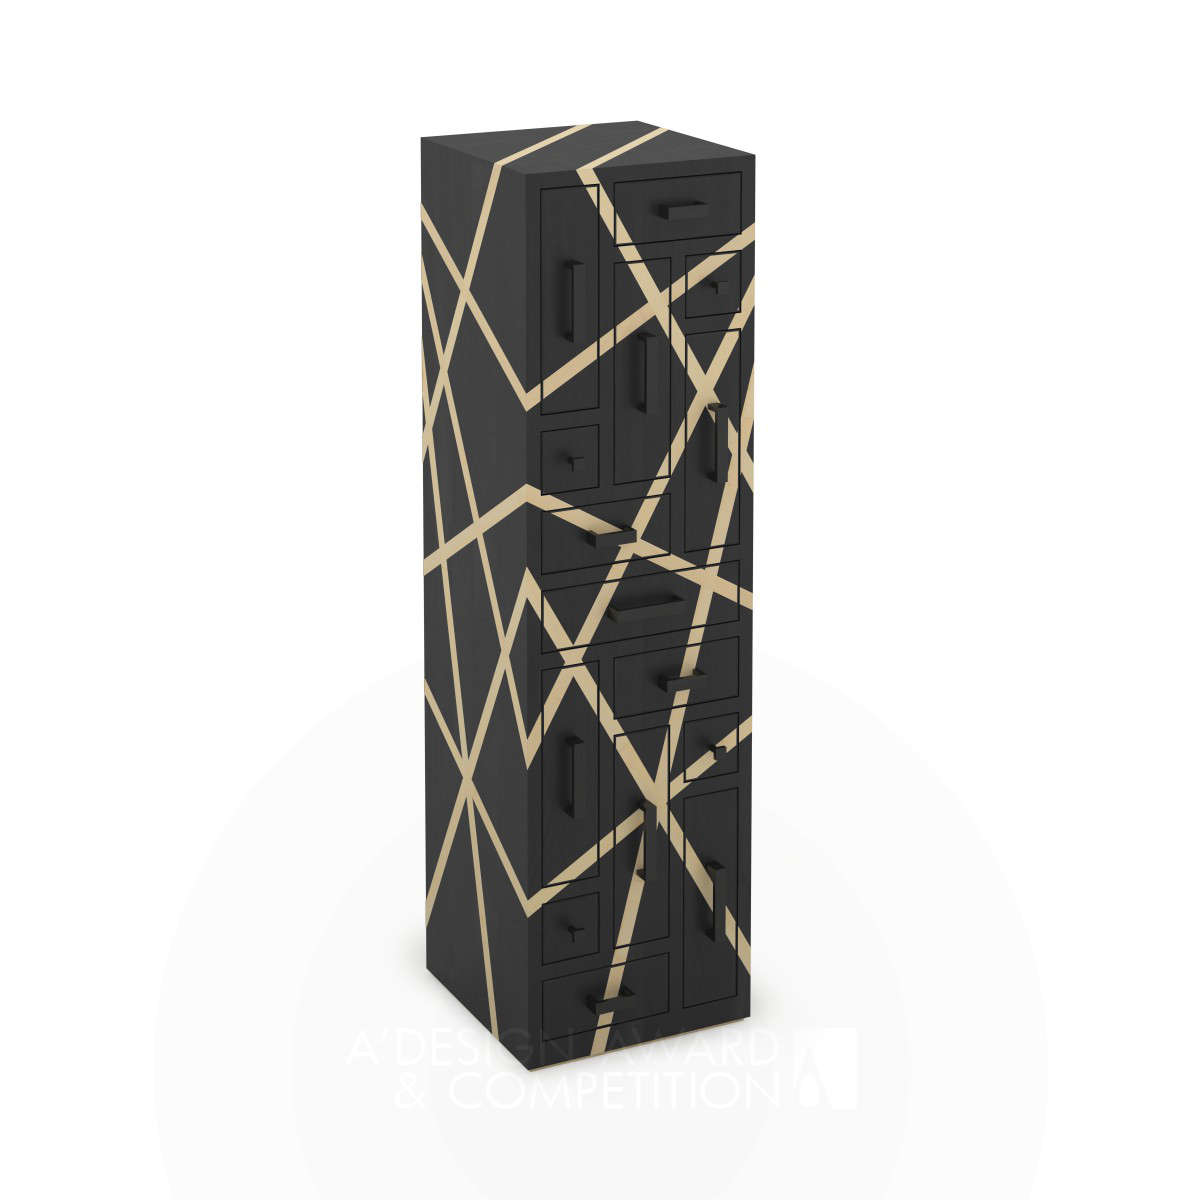 Black Labyrinth Chest of drawers by Eckhard Beger